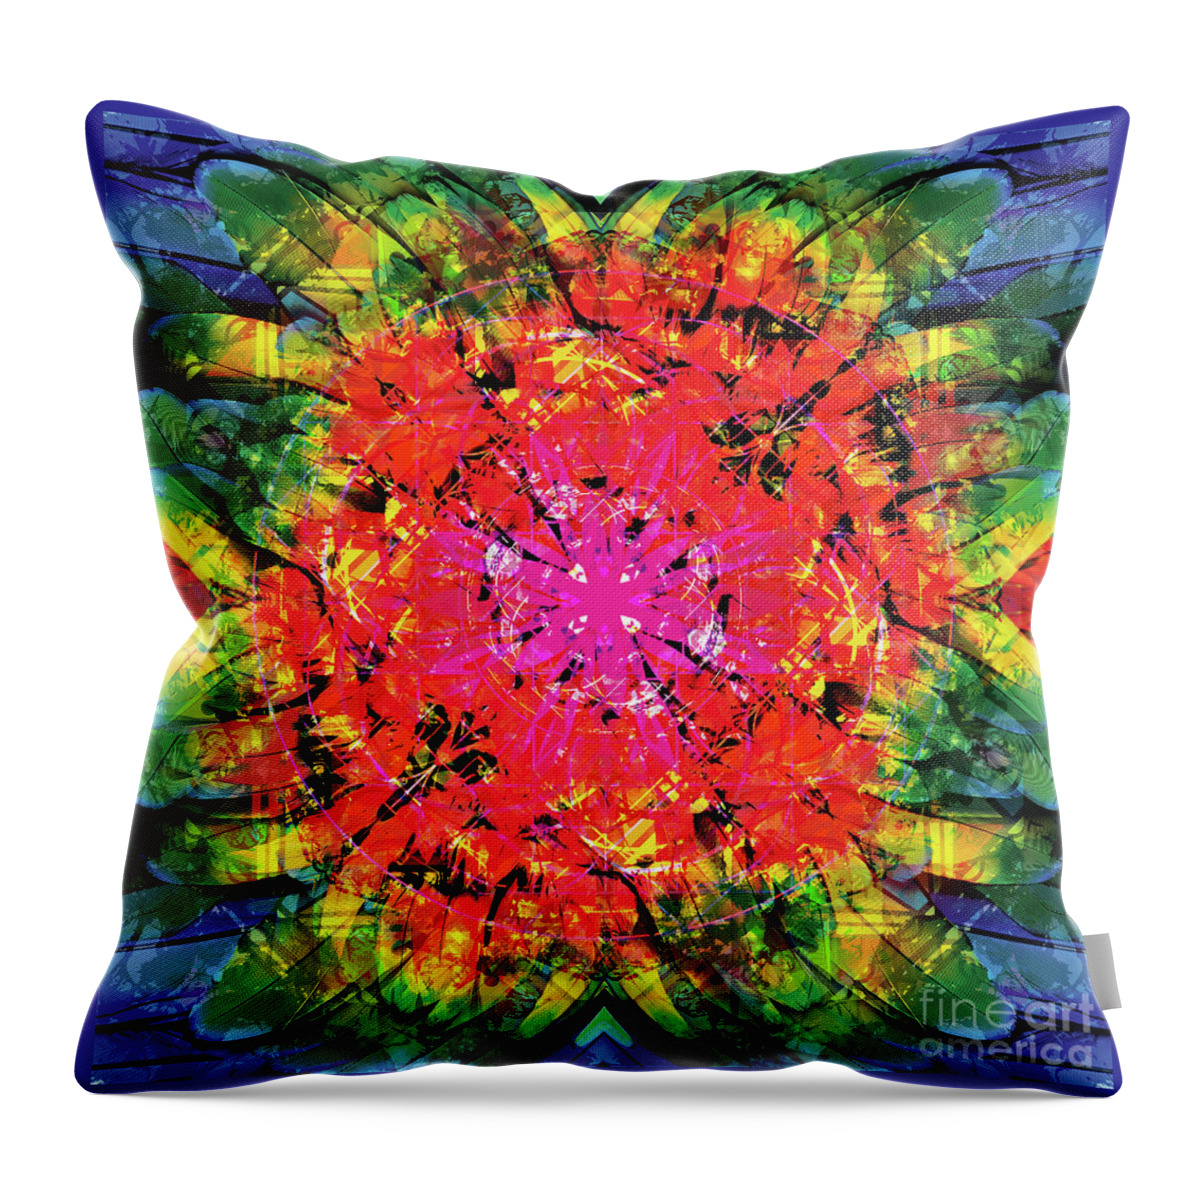 Abstract Throw Pillow featuring the digital art Butterfly Design by Xrista Stavrou